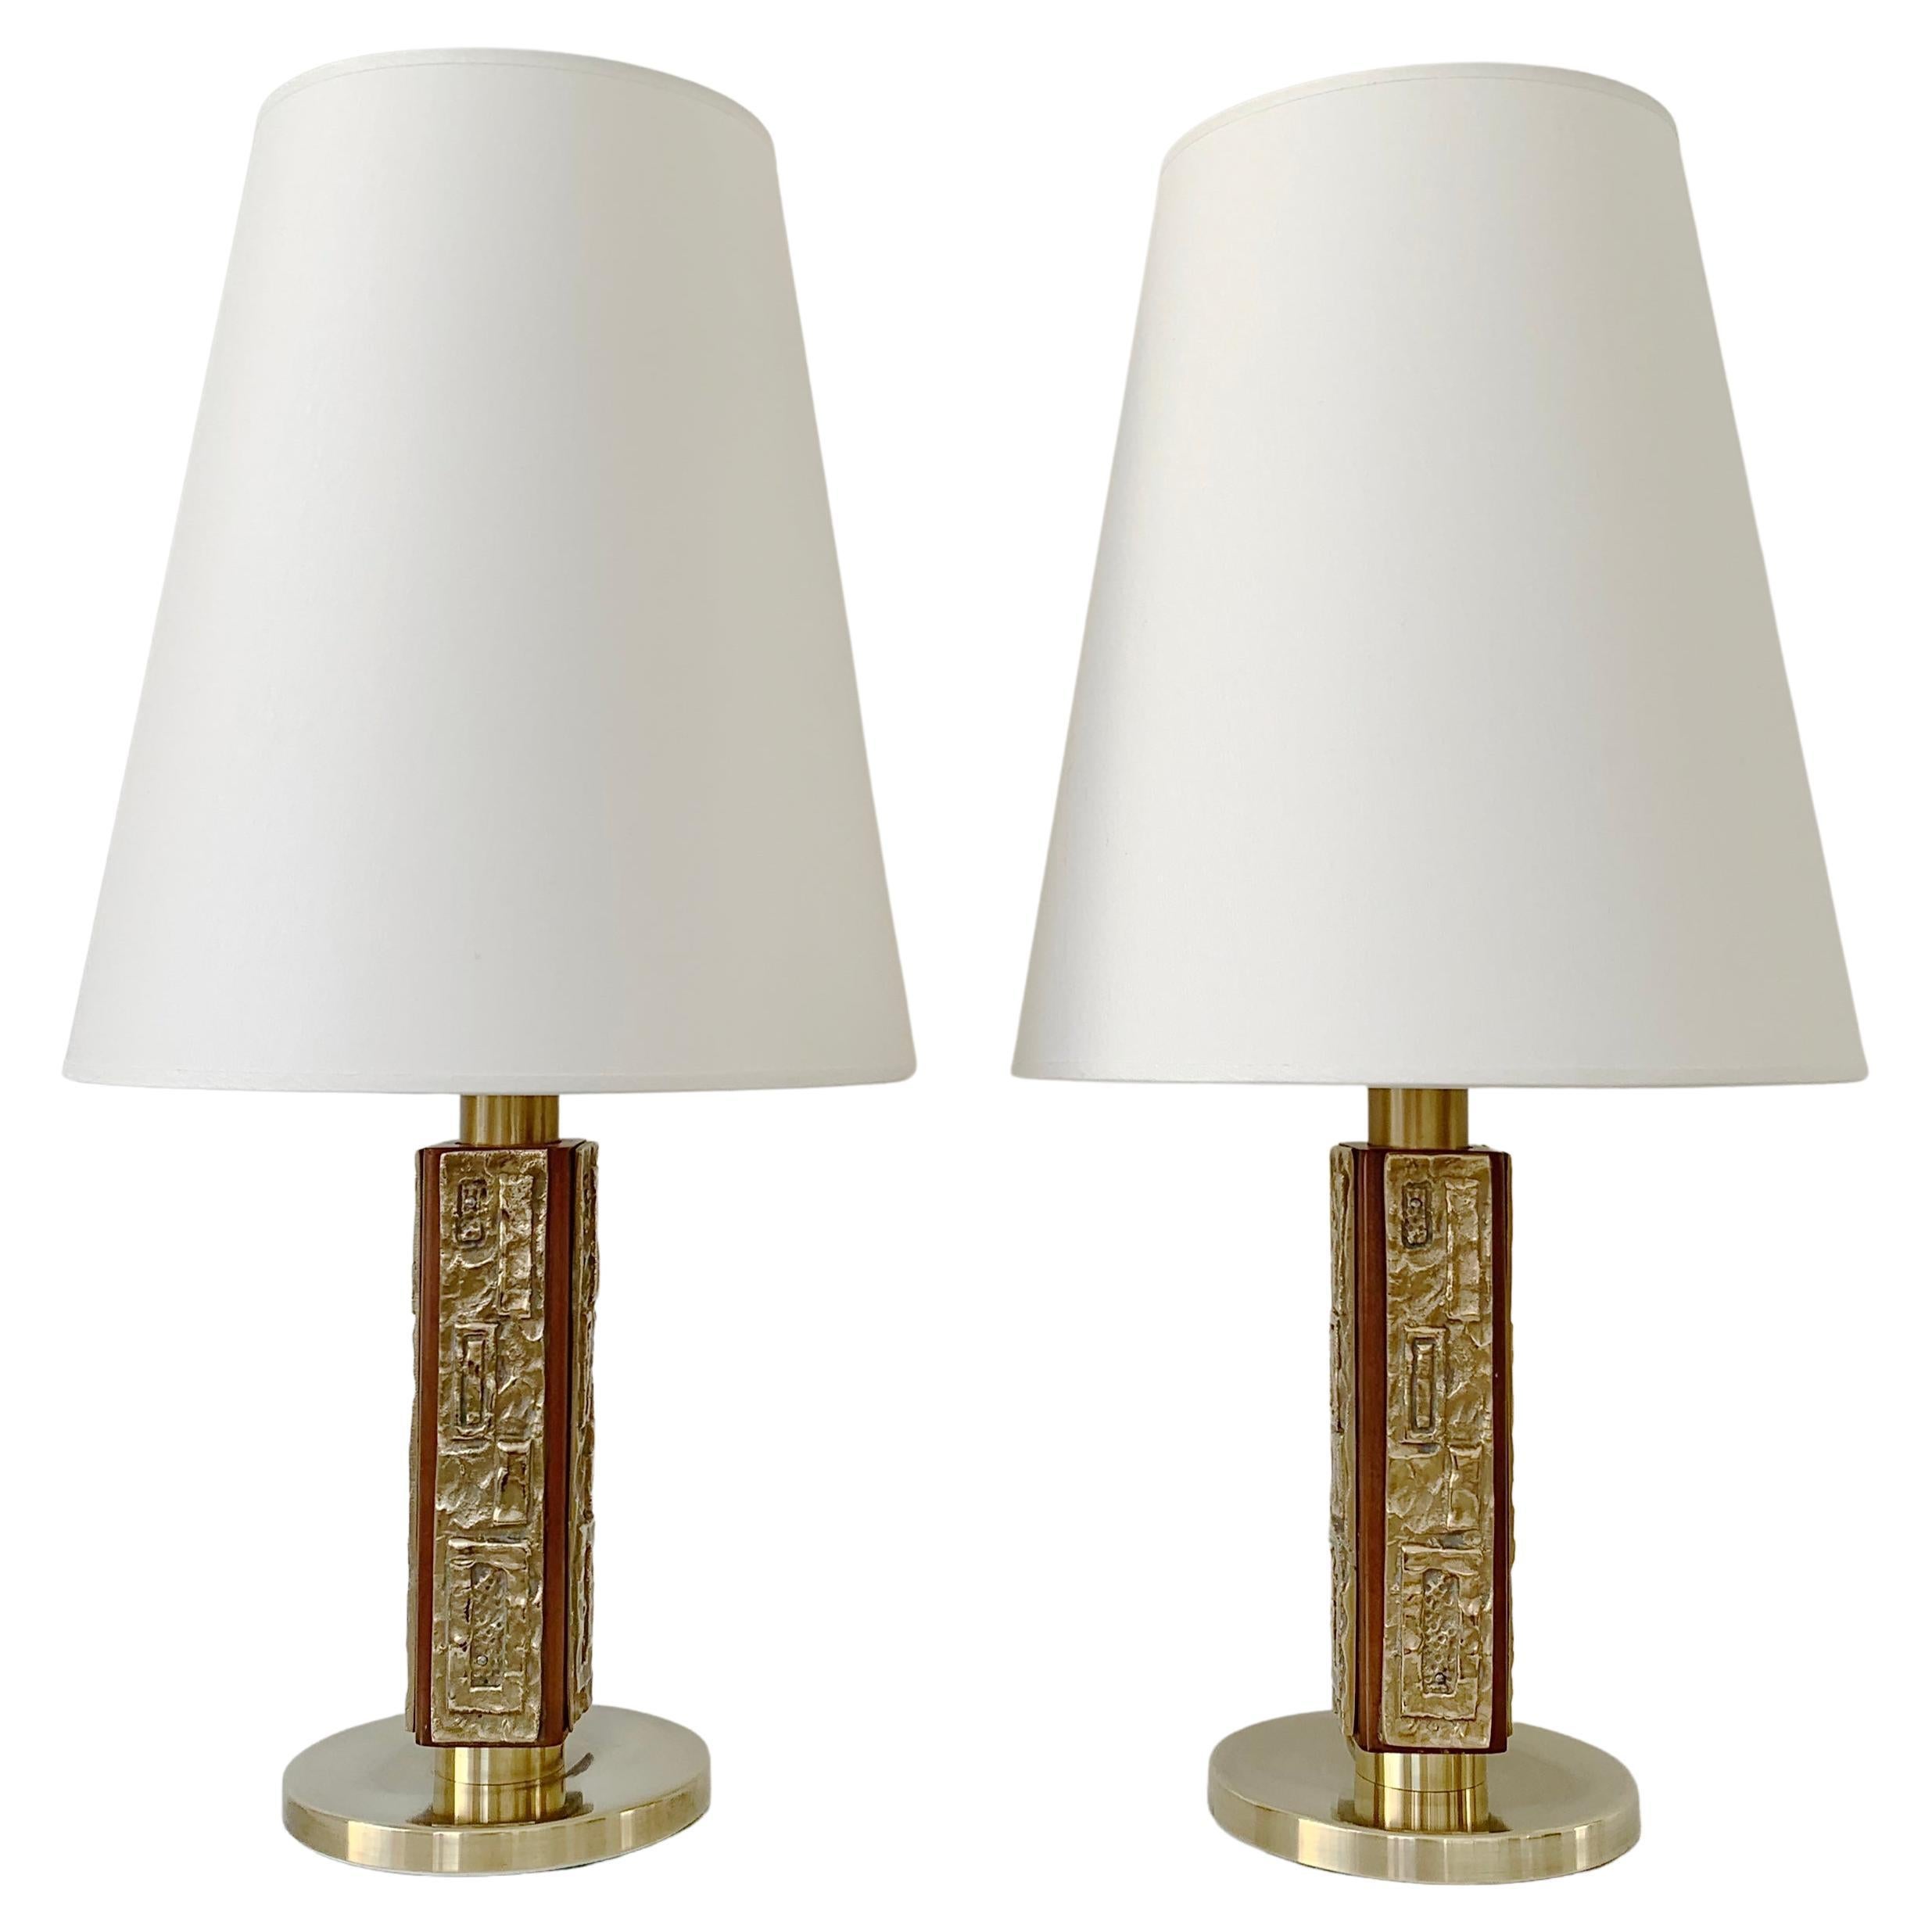 Nice pair of Angelo Brotto table lamps, circa 1970, Italy.
Bronze, brass, wood and new fabric shades.
Rewired, E14 bulb.
Dimensions: total height: 54 cm, diameter of the shade: 26 cm.
Good original condition.
All purchases are covered by our Buyer